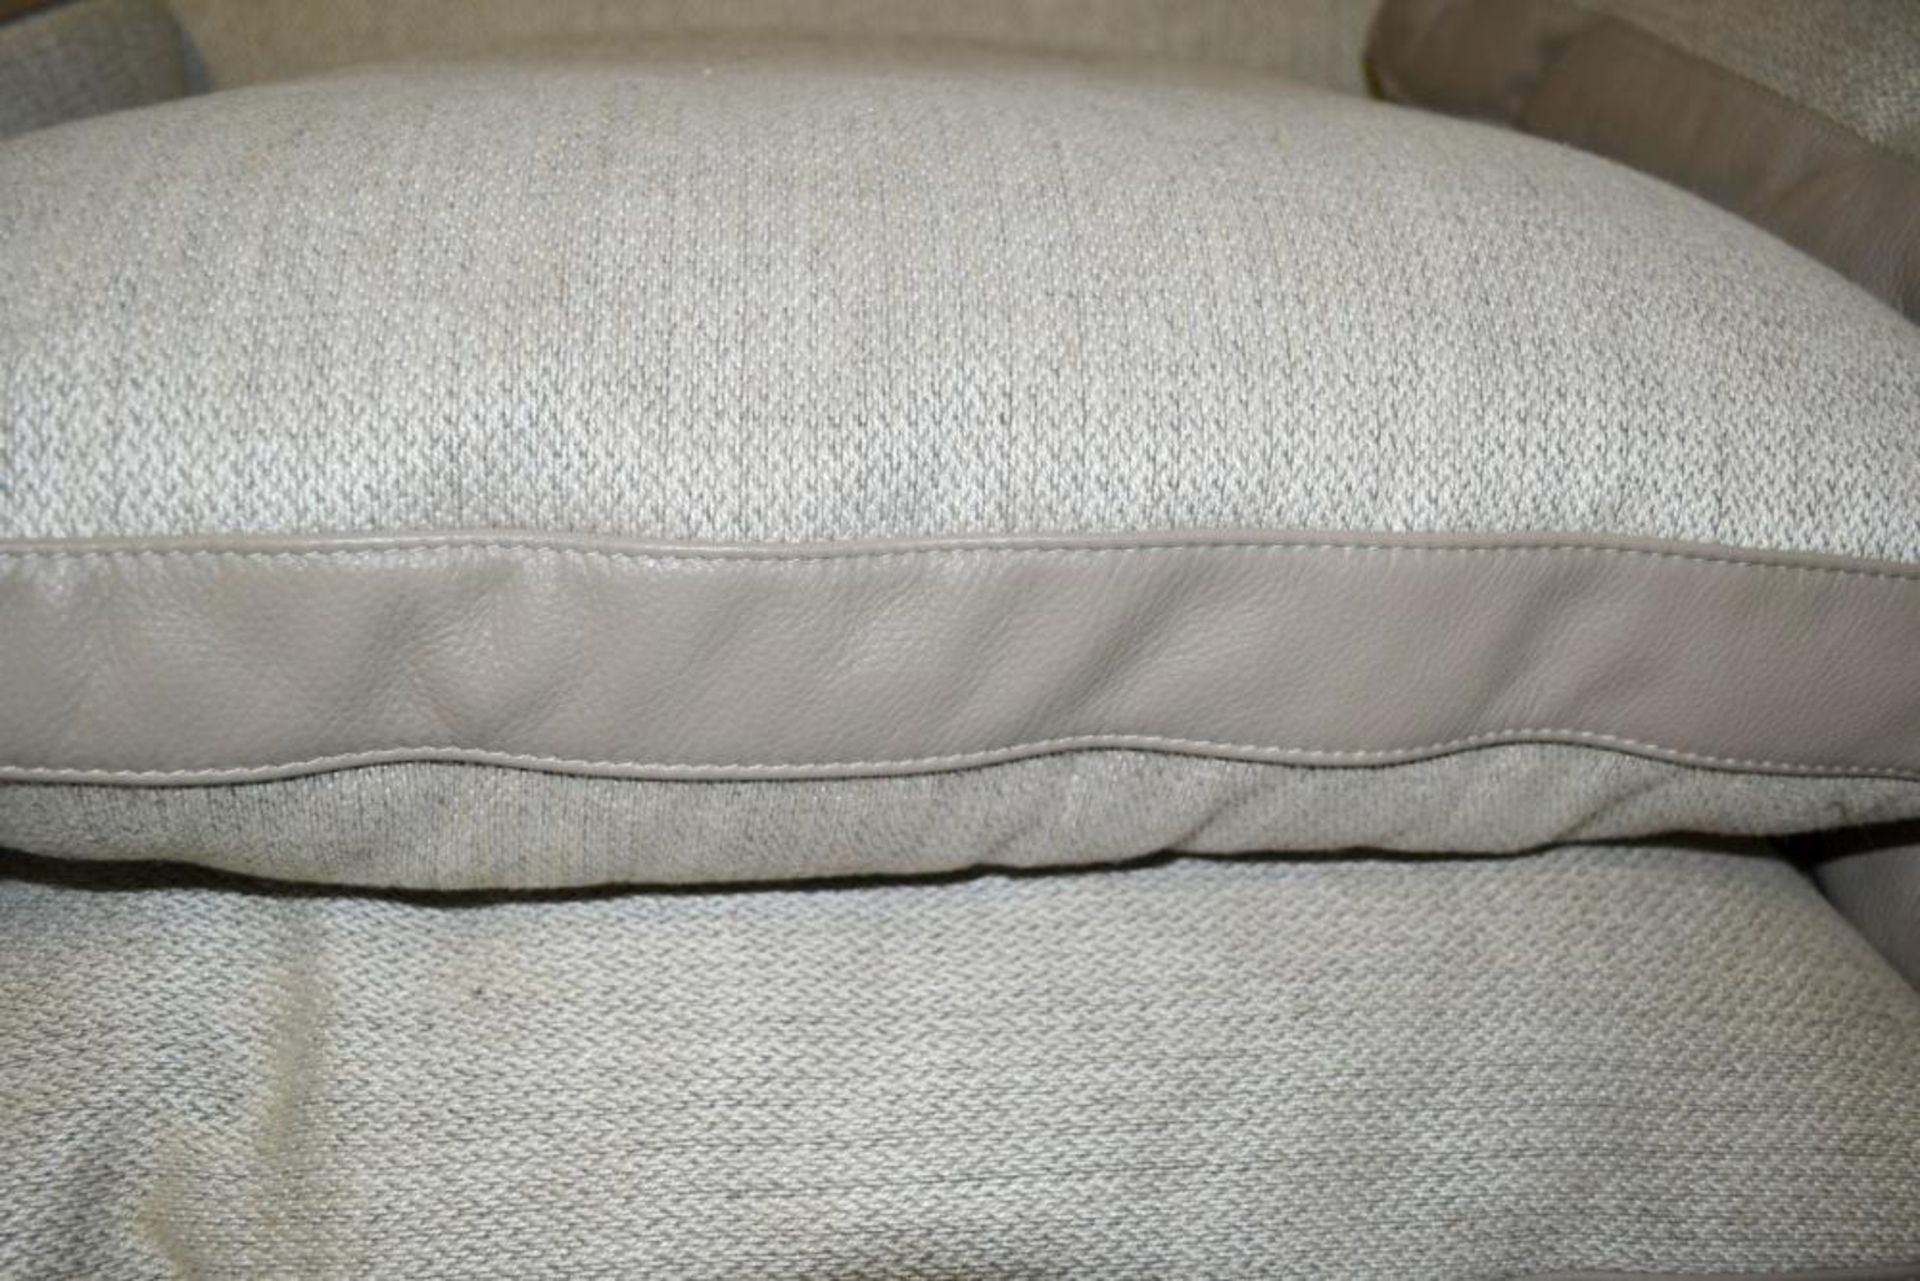 1 x POLTRONA FRAU "Mass Angolo" Large Left-Hand Sofa Element - Richly Upholstered In A Mix Of Fabric - Image 4 of 11